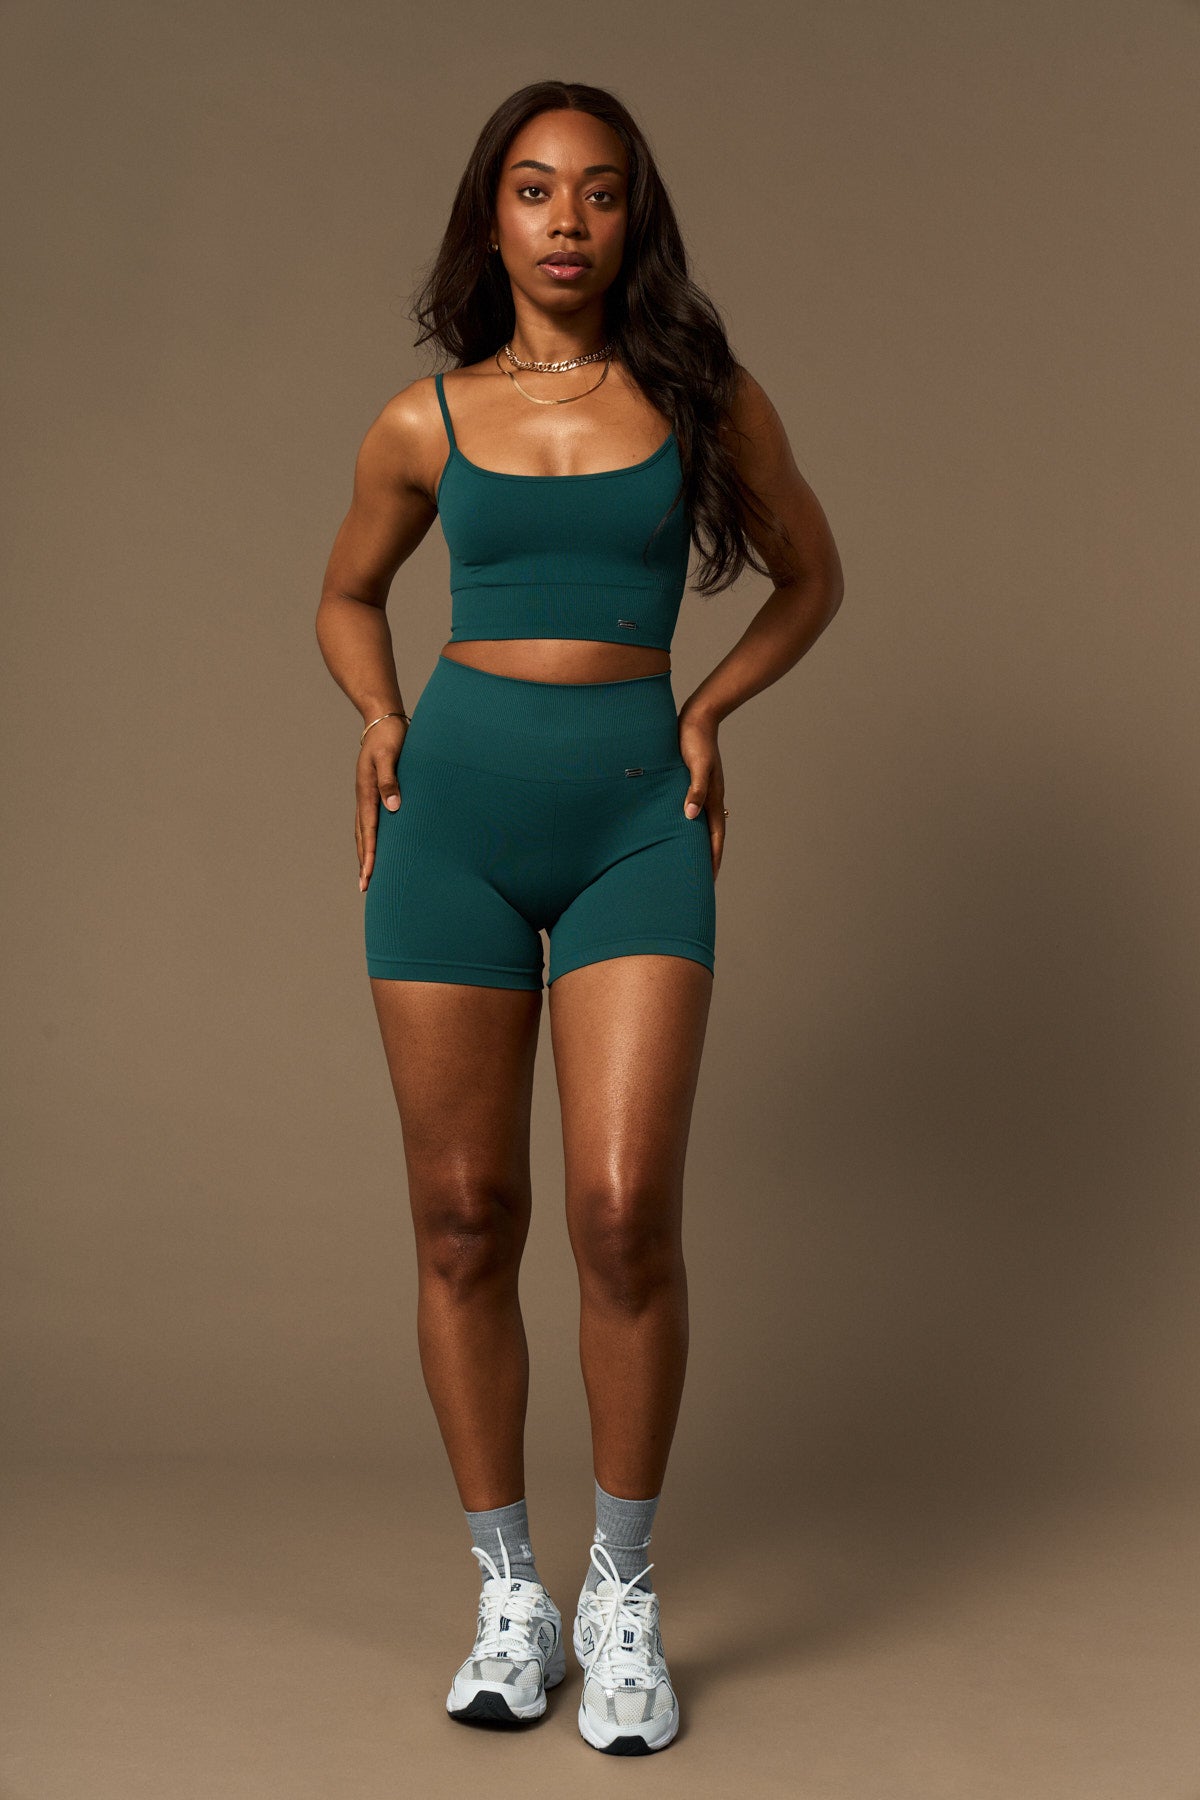 Bliss Short en Pine-Shorts-Tienda Ropa Leggings Yoga Sostenibles Reciclados Mujer On-line Barcelona Believe Athletics Sustainable Recycled Yoga Clothes